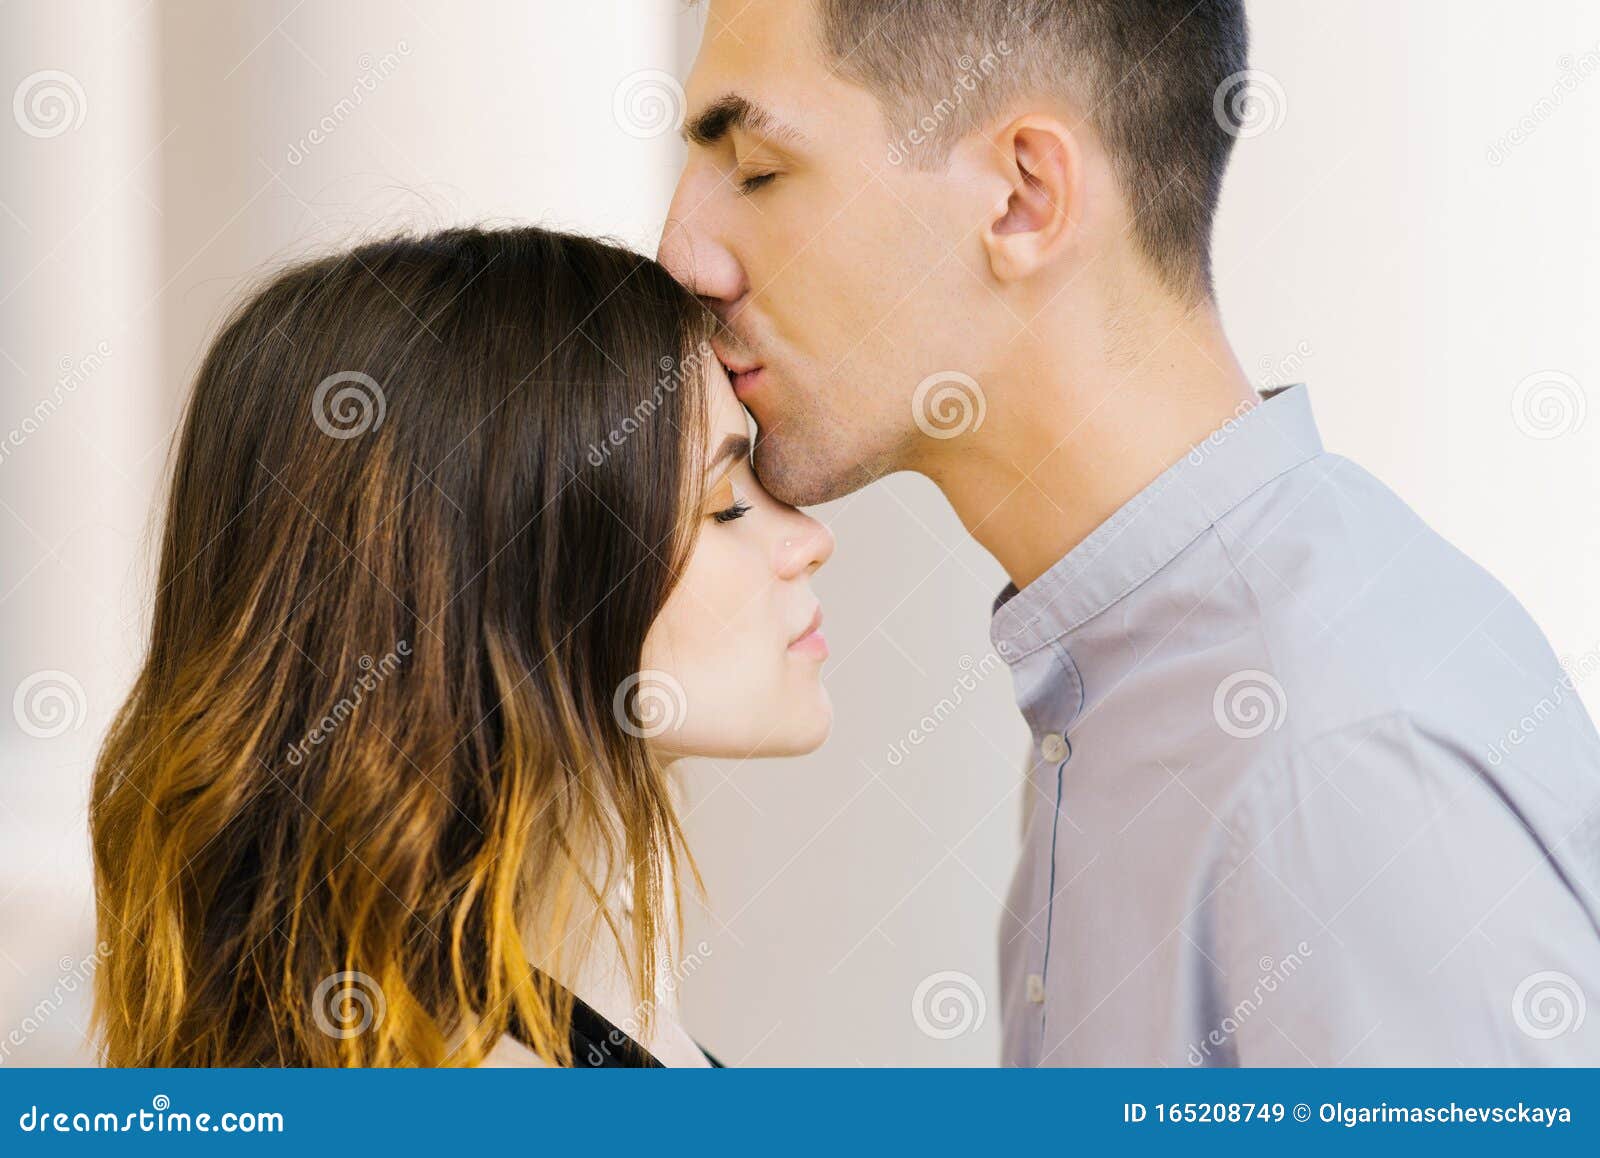 Kiss A Beautiful Couple In Love On The Forehead Stock